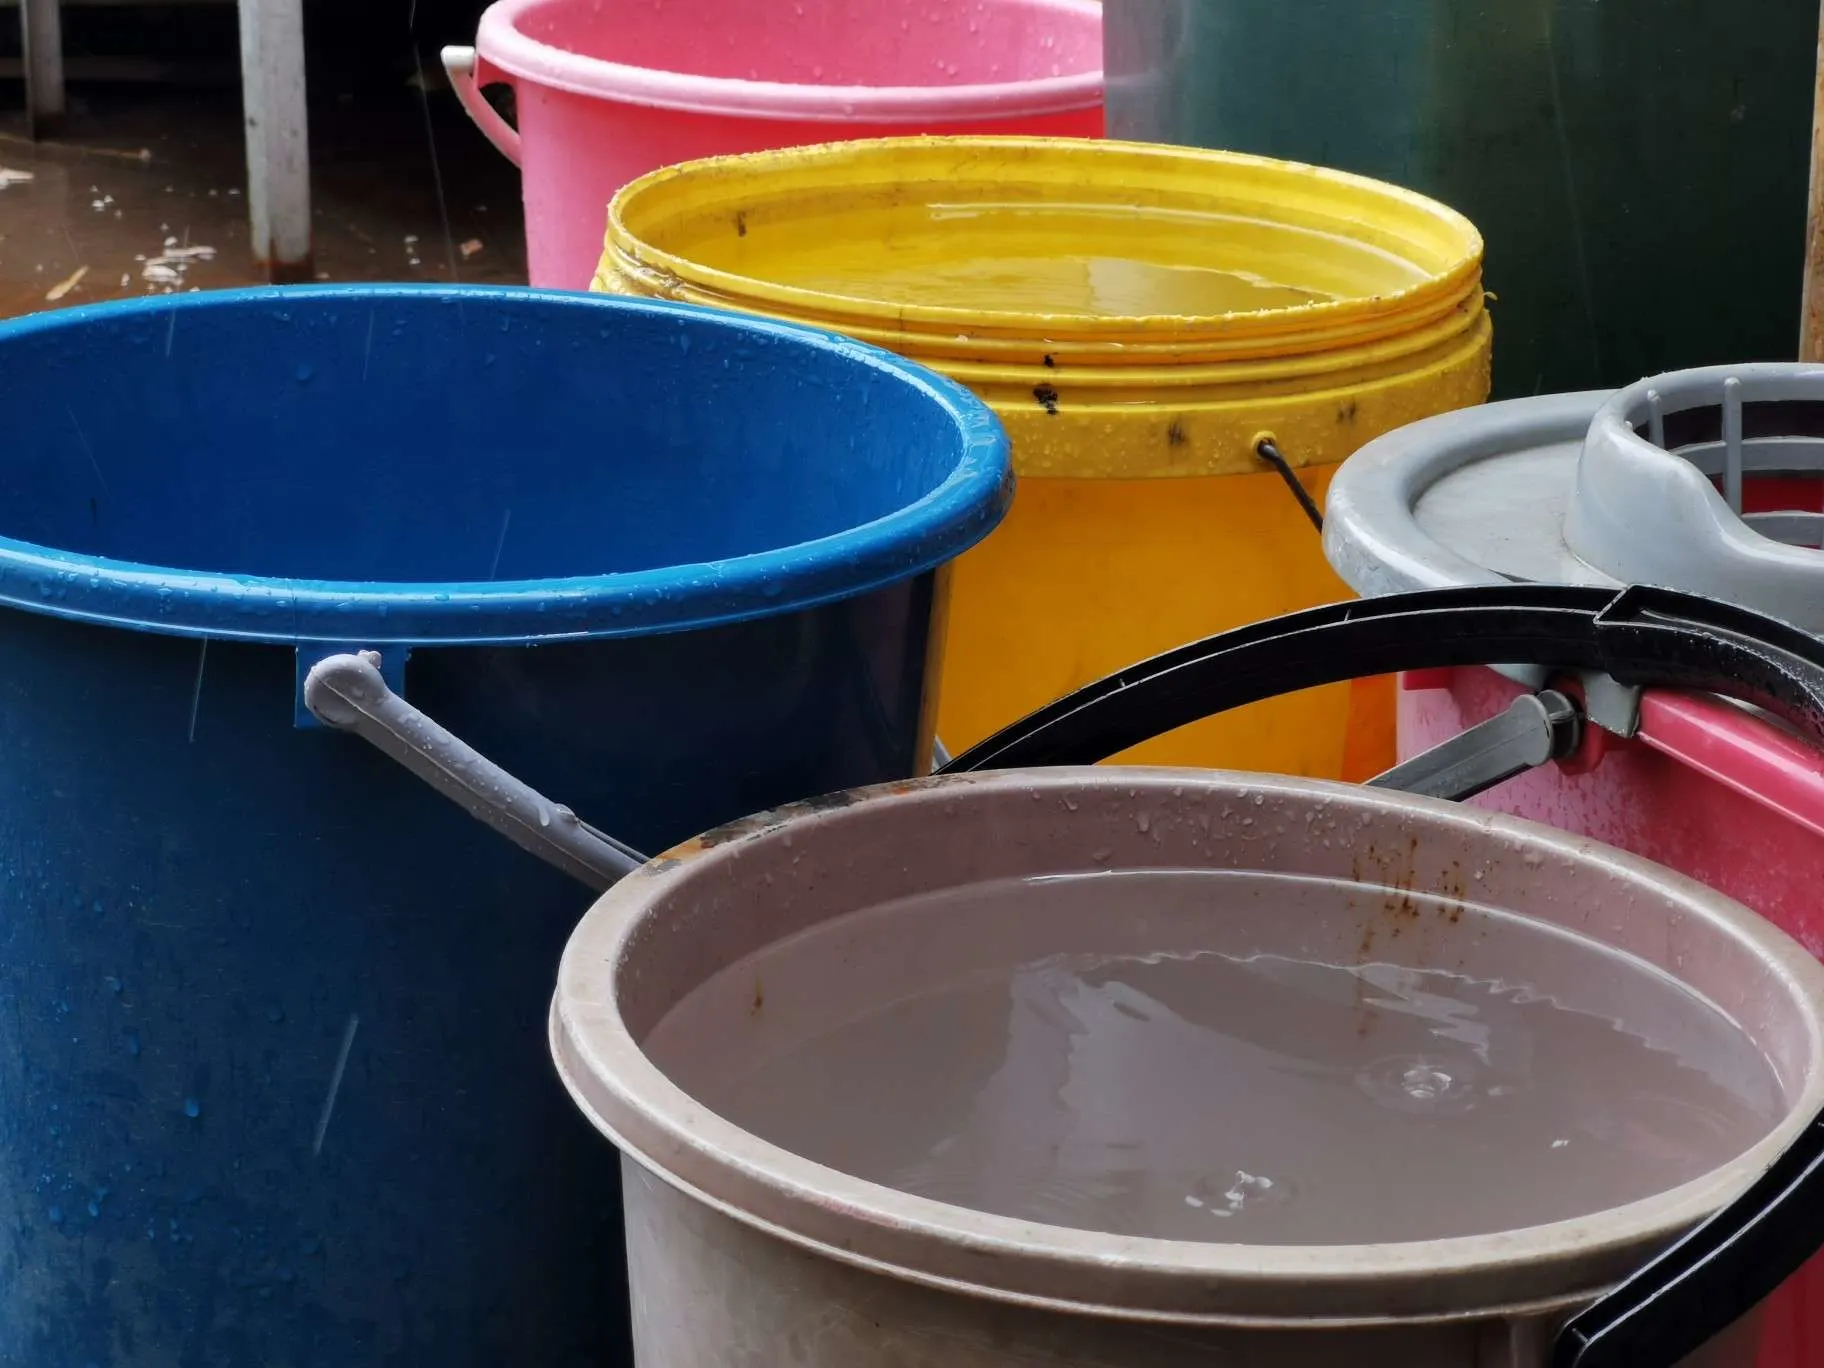 Buckets sitting out in rain collecting rainwater